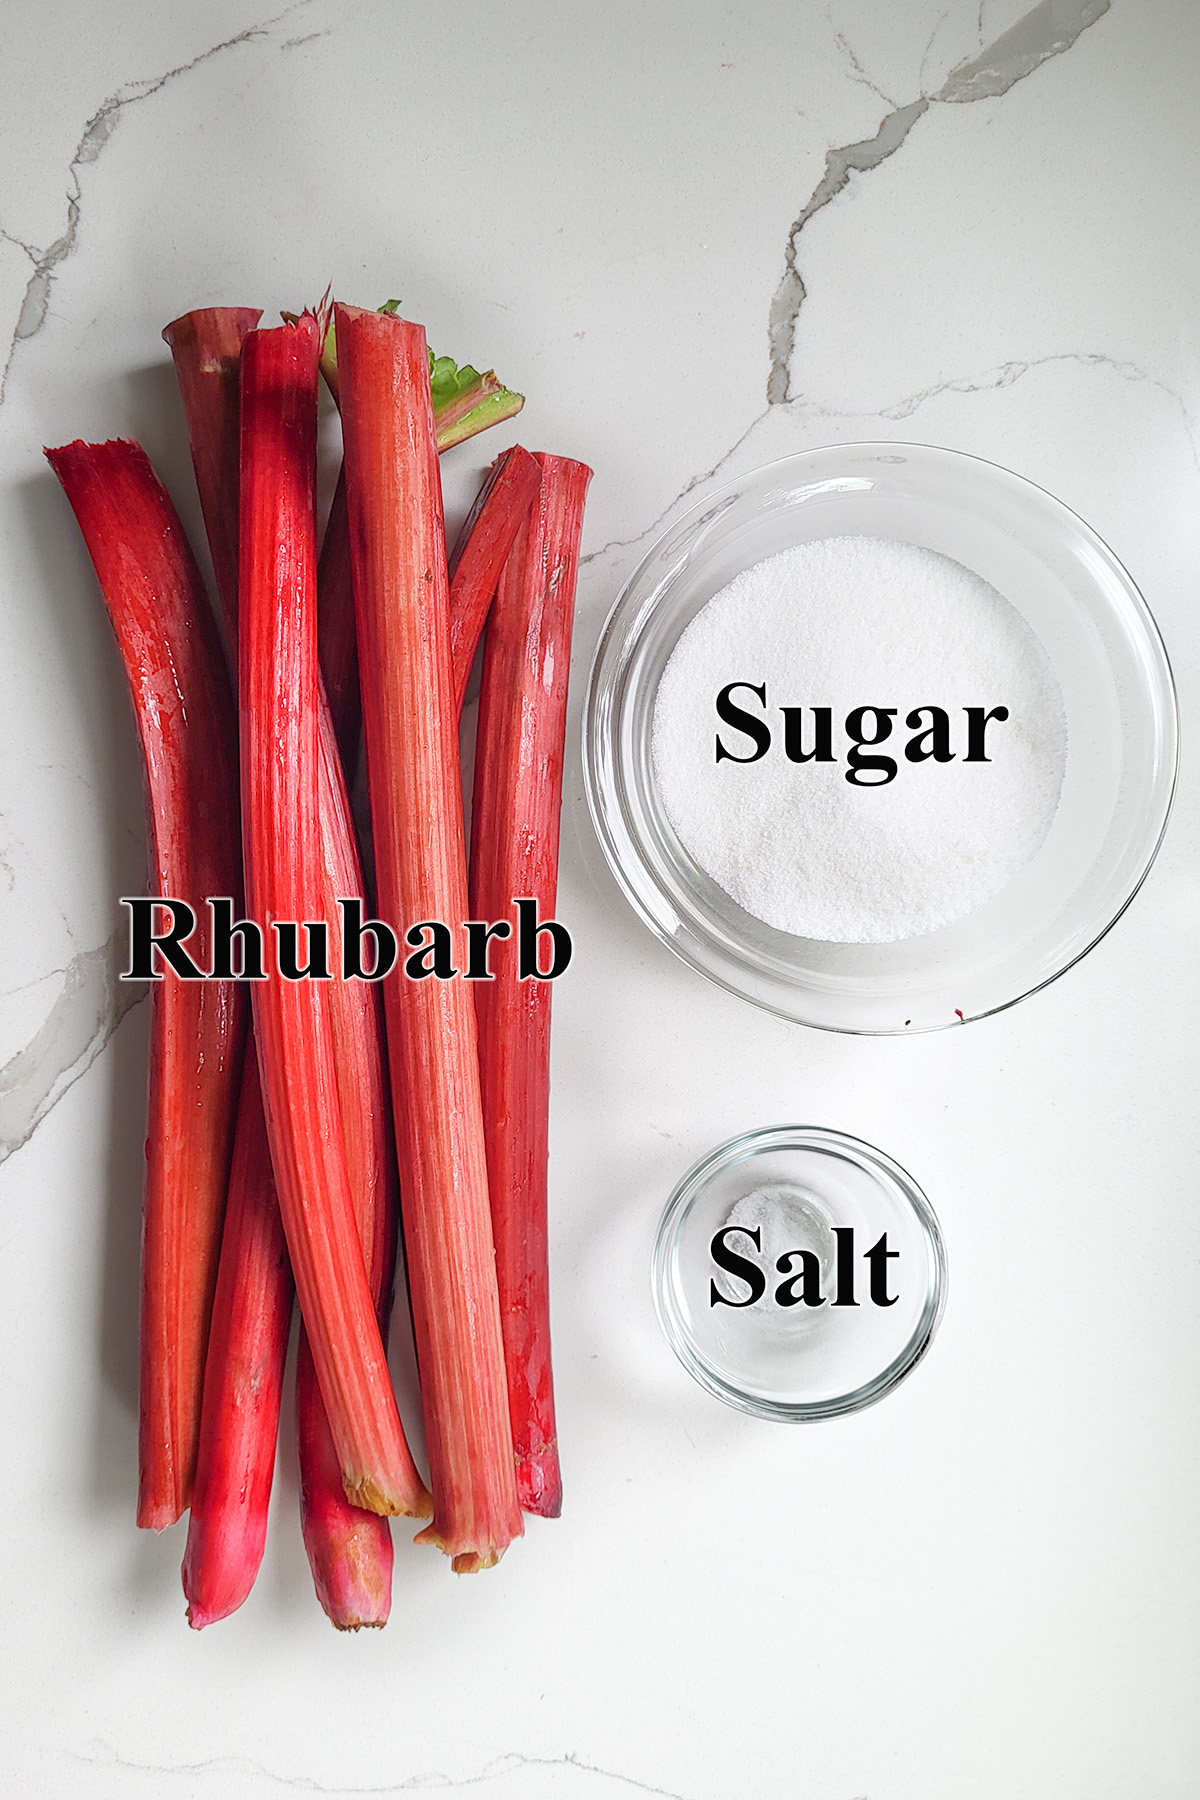 ingredients for rhubarb compote in glass bowls.